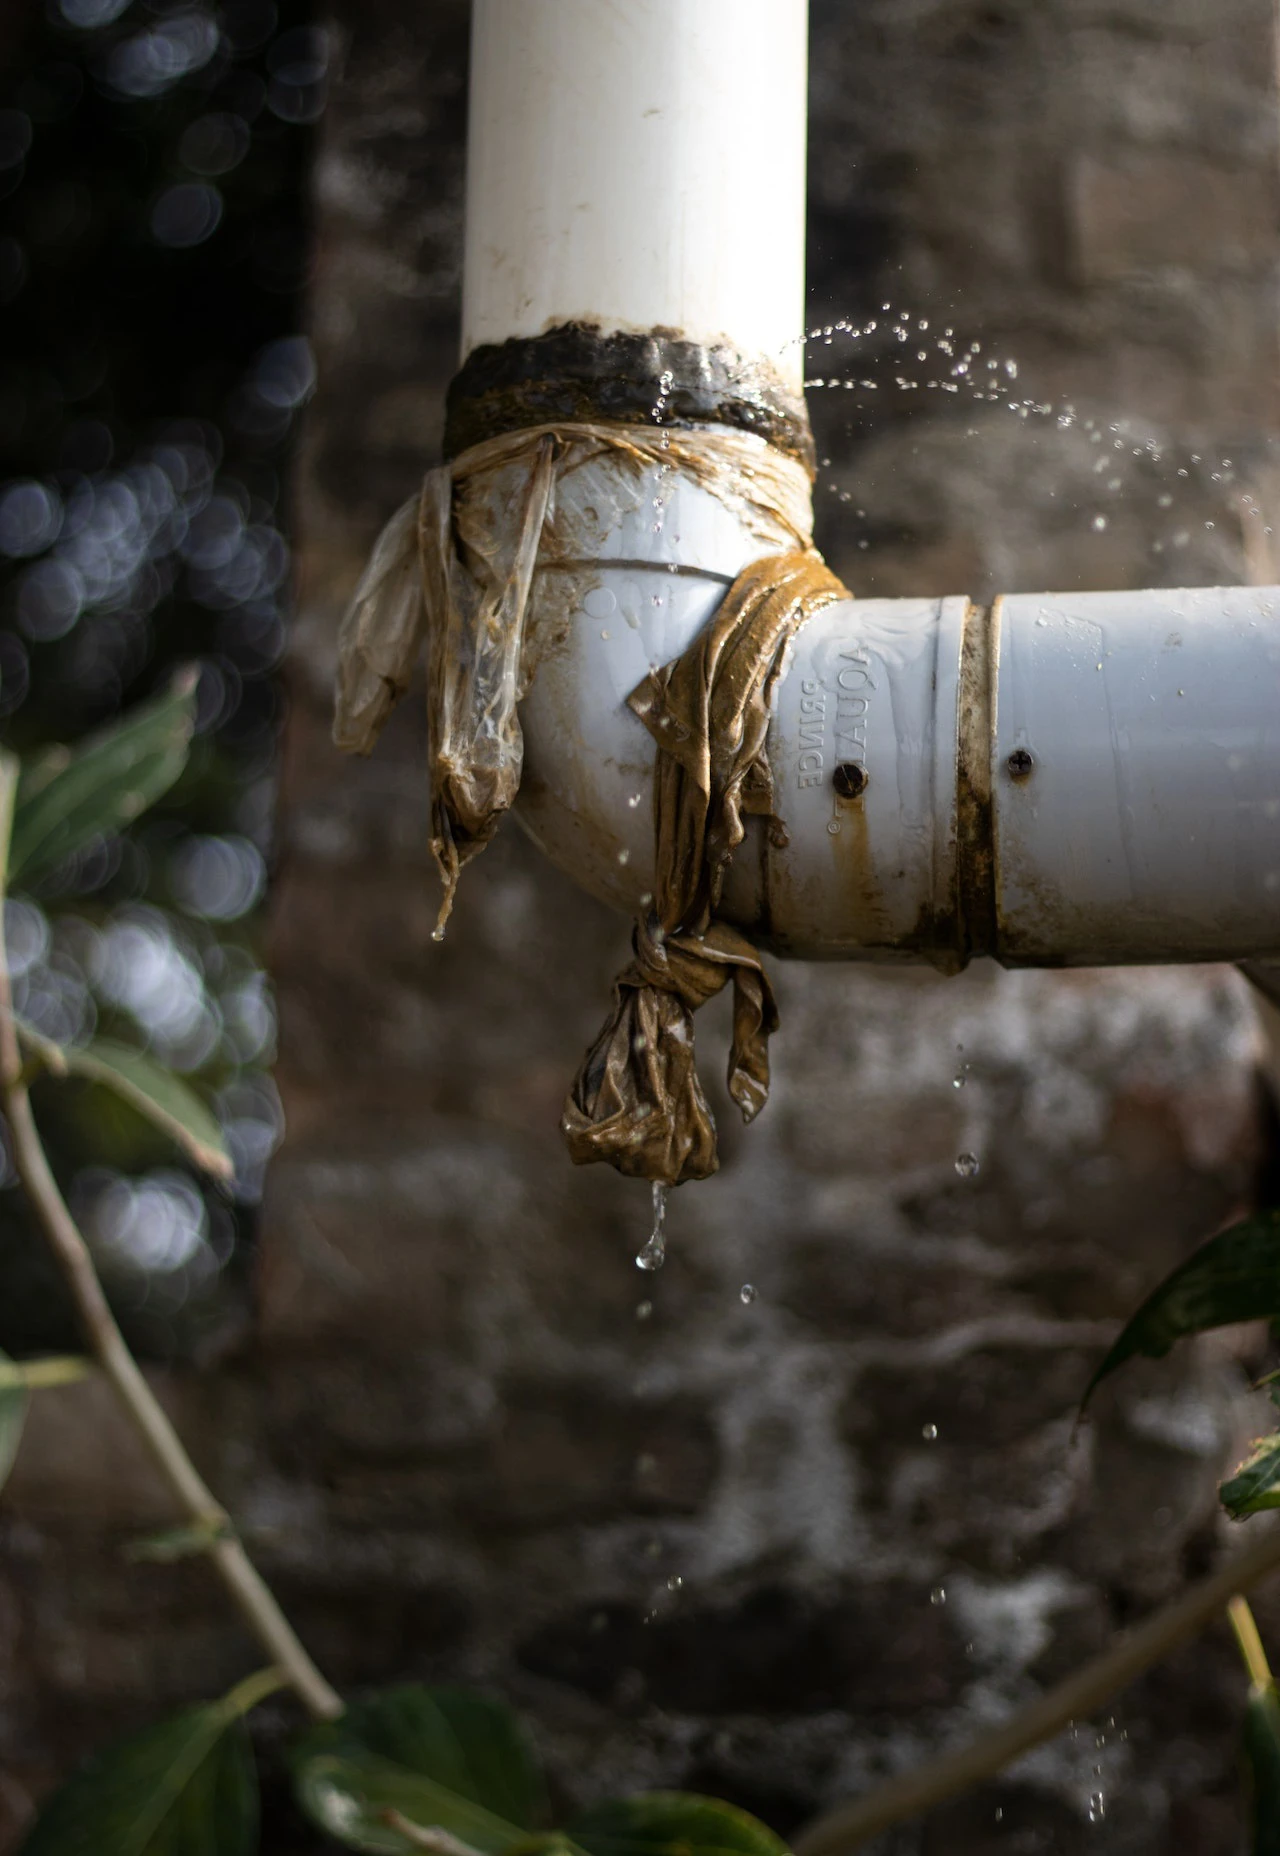 A leaky pipe with water spraying out